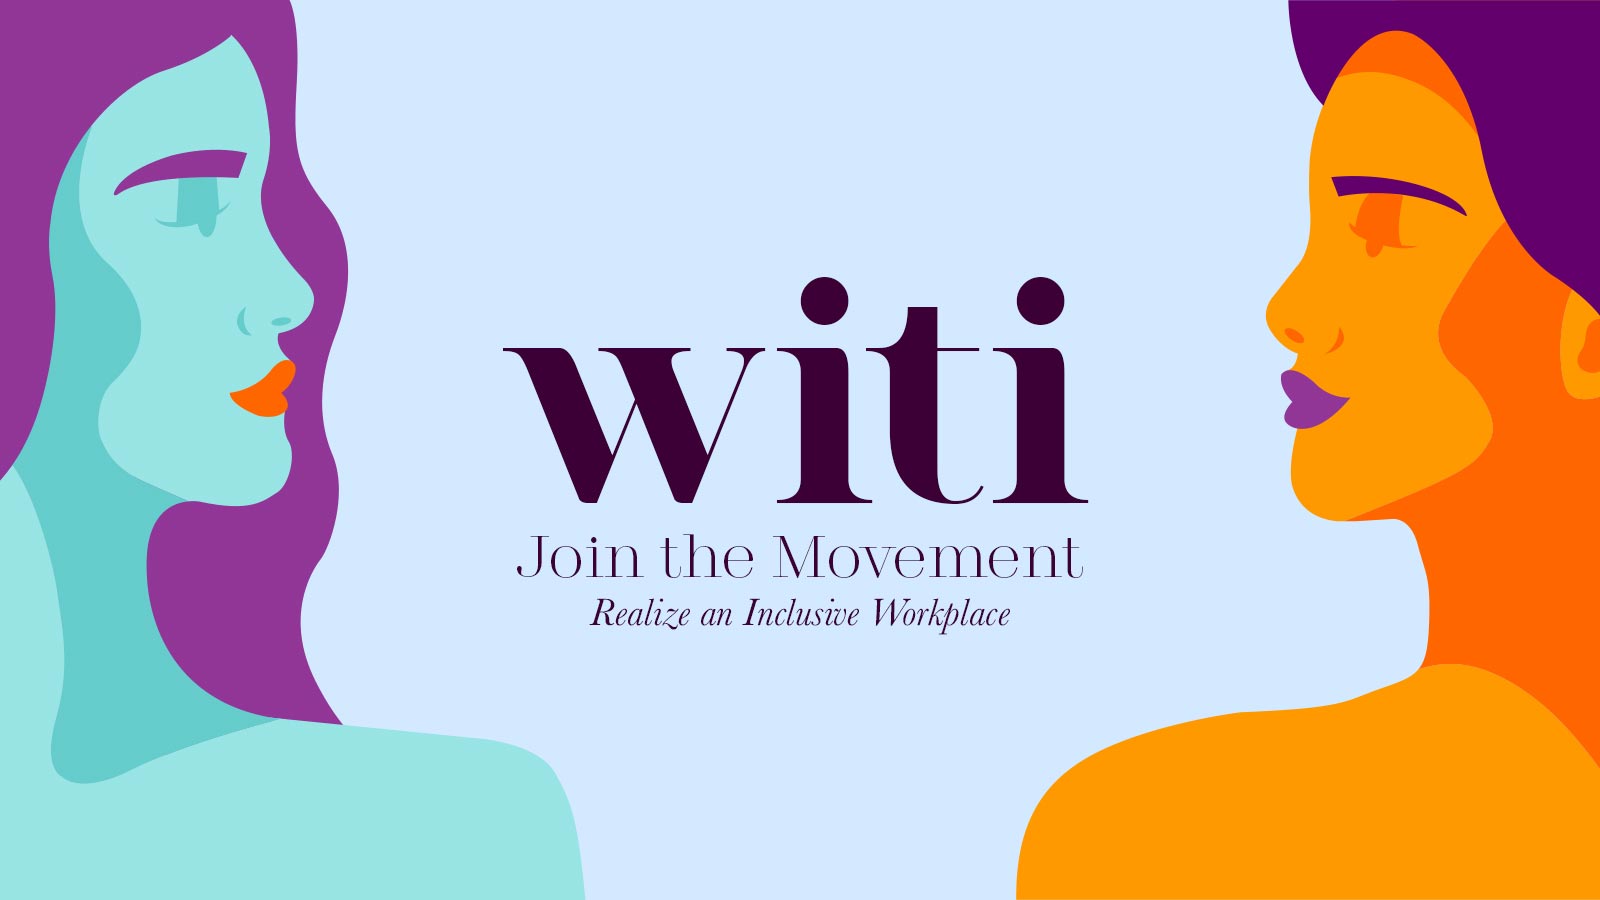 WITI — Join the Movement: Realize an Inclusive Workplace